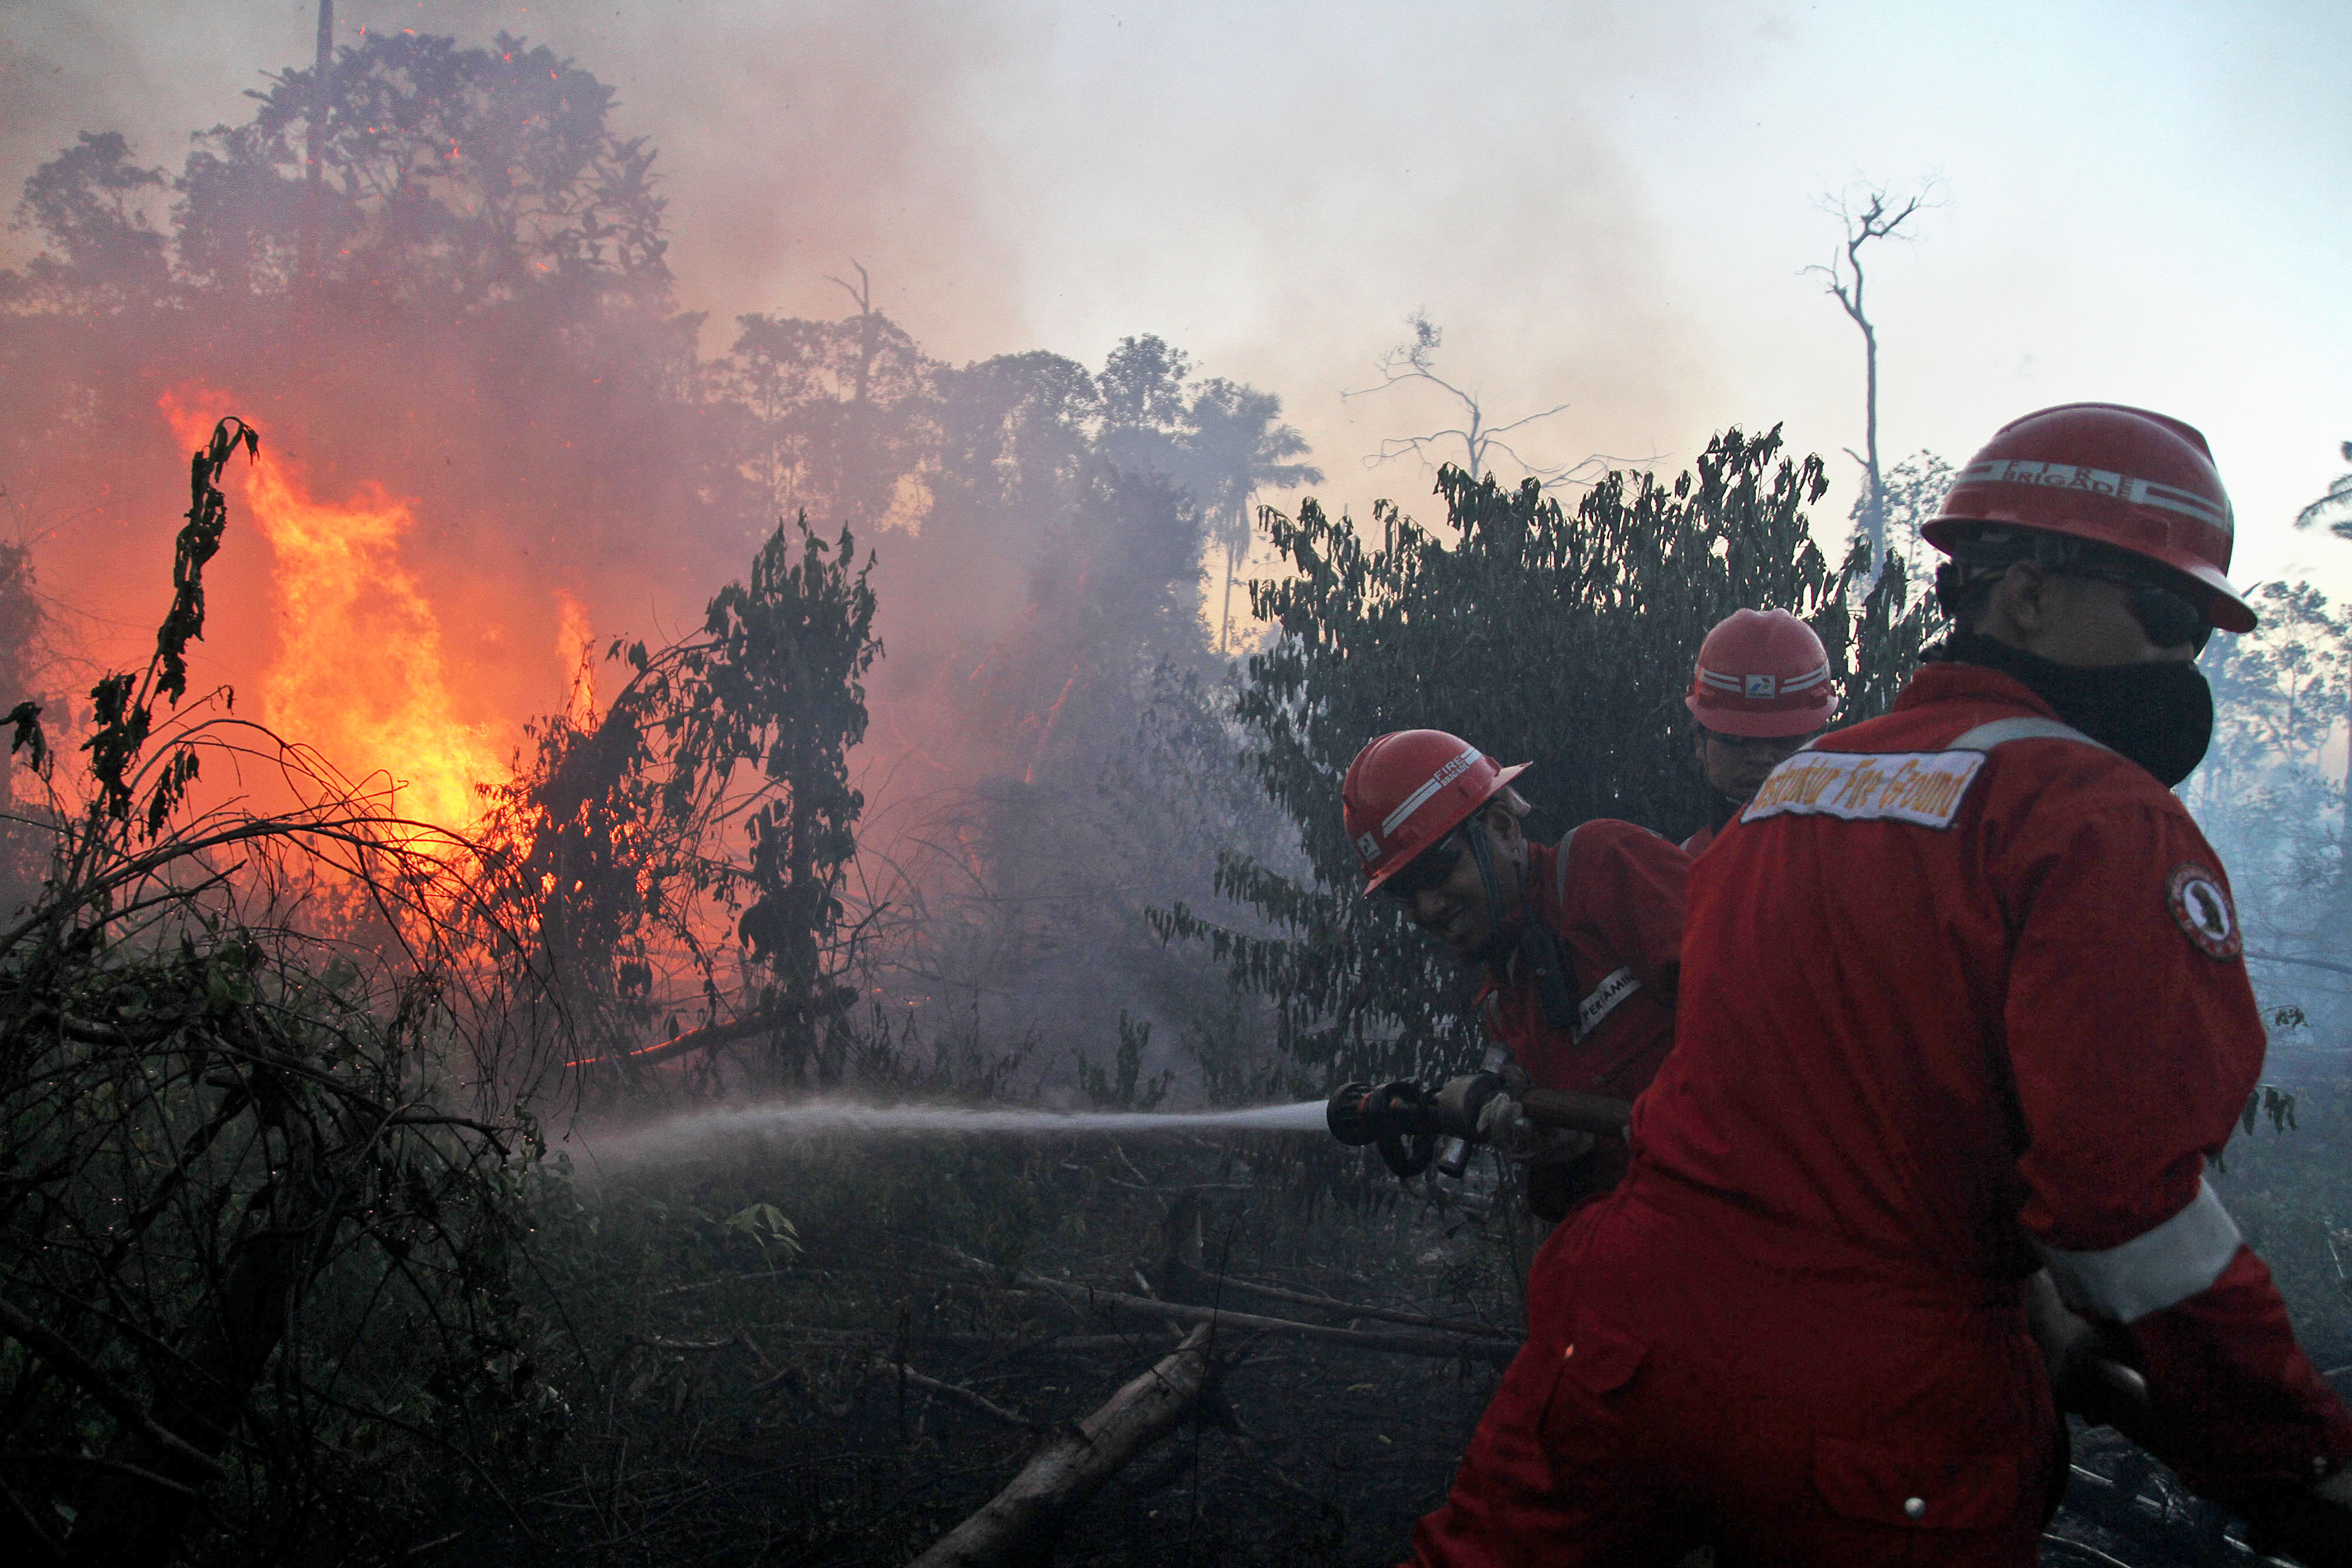 Indonesia Forest Fires